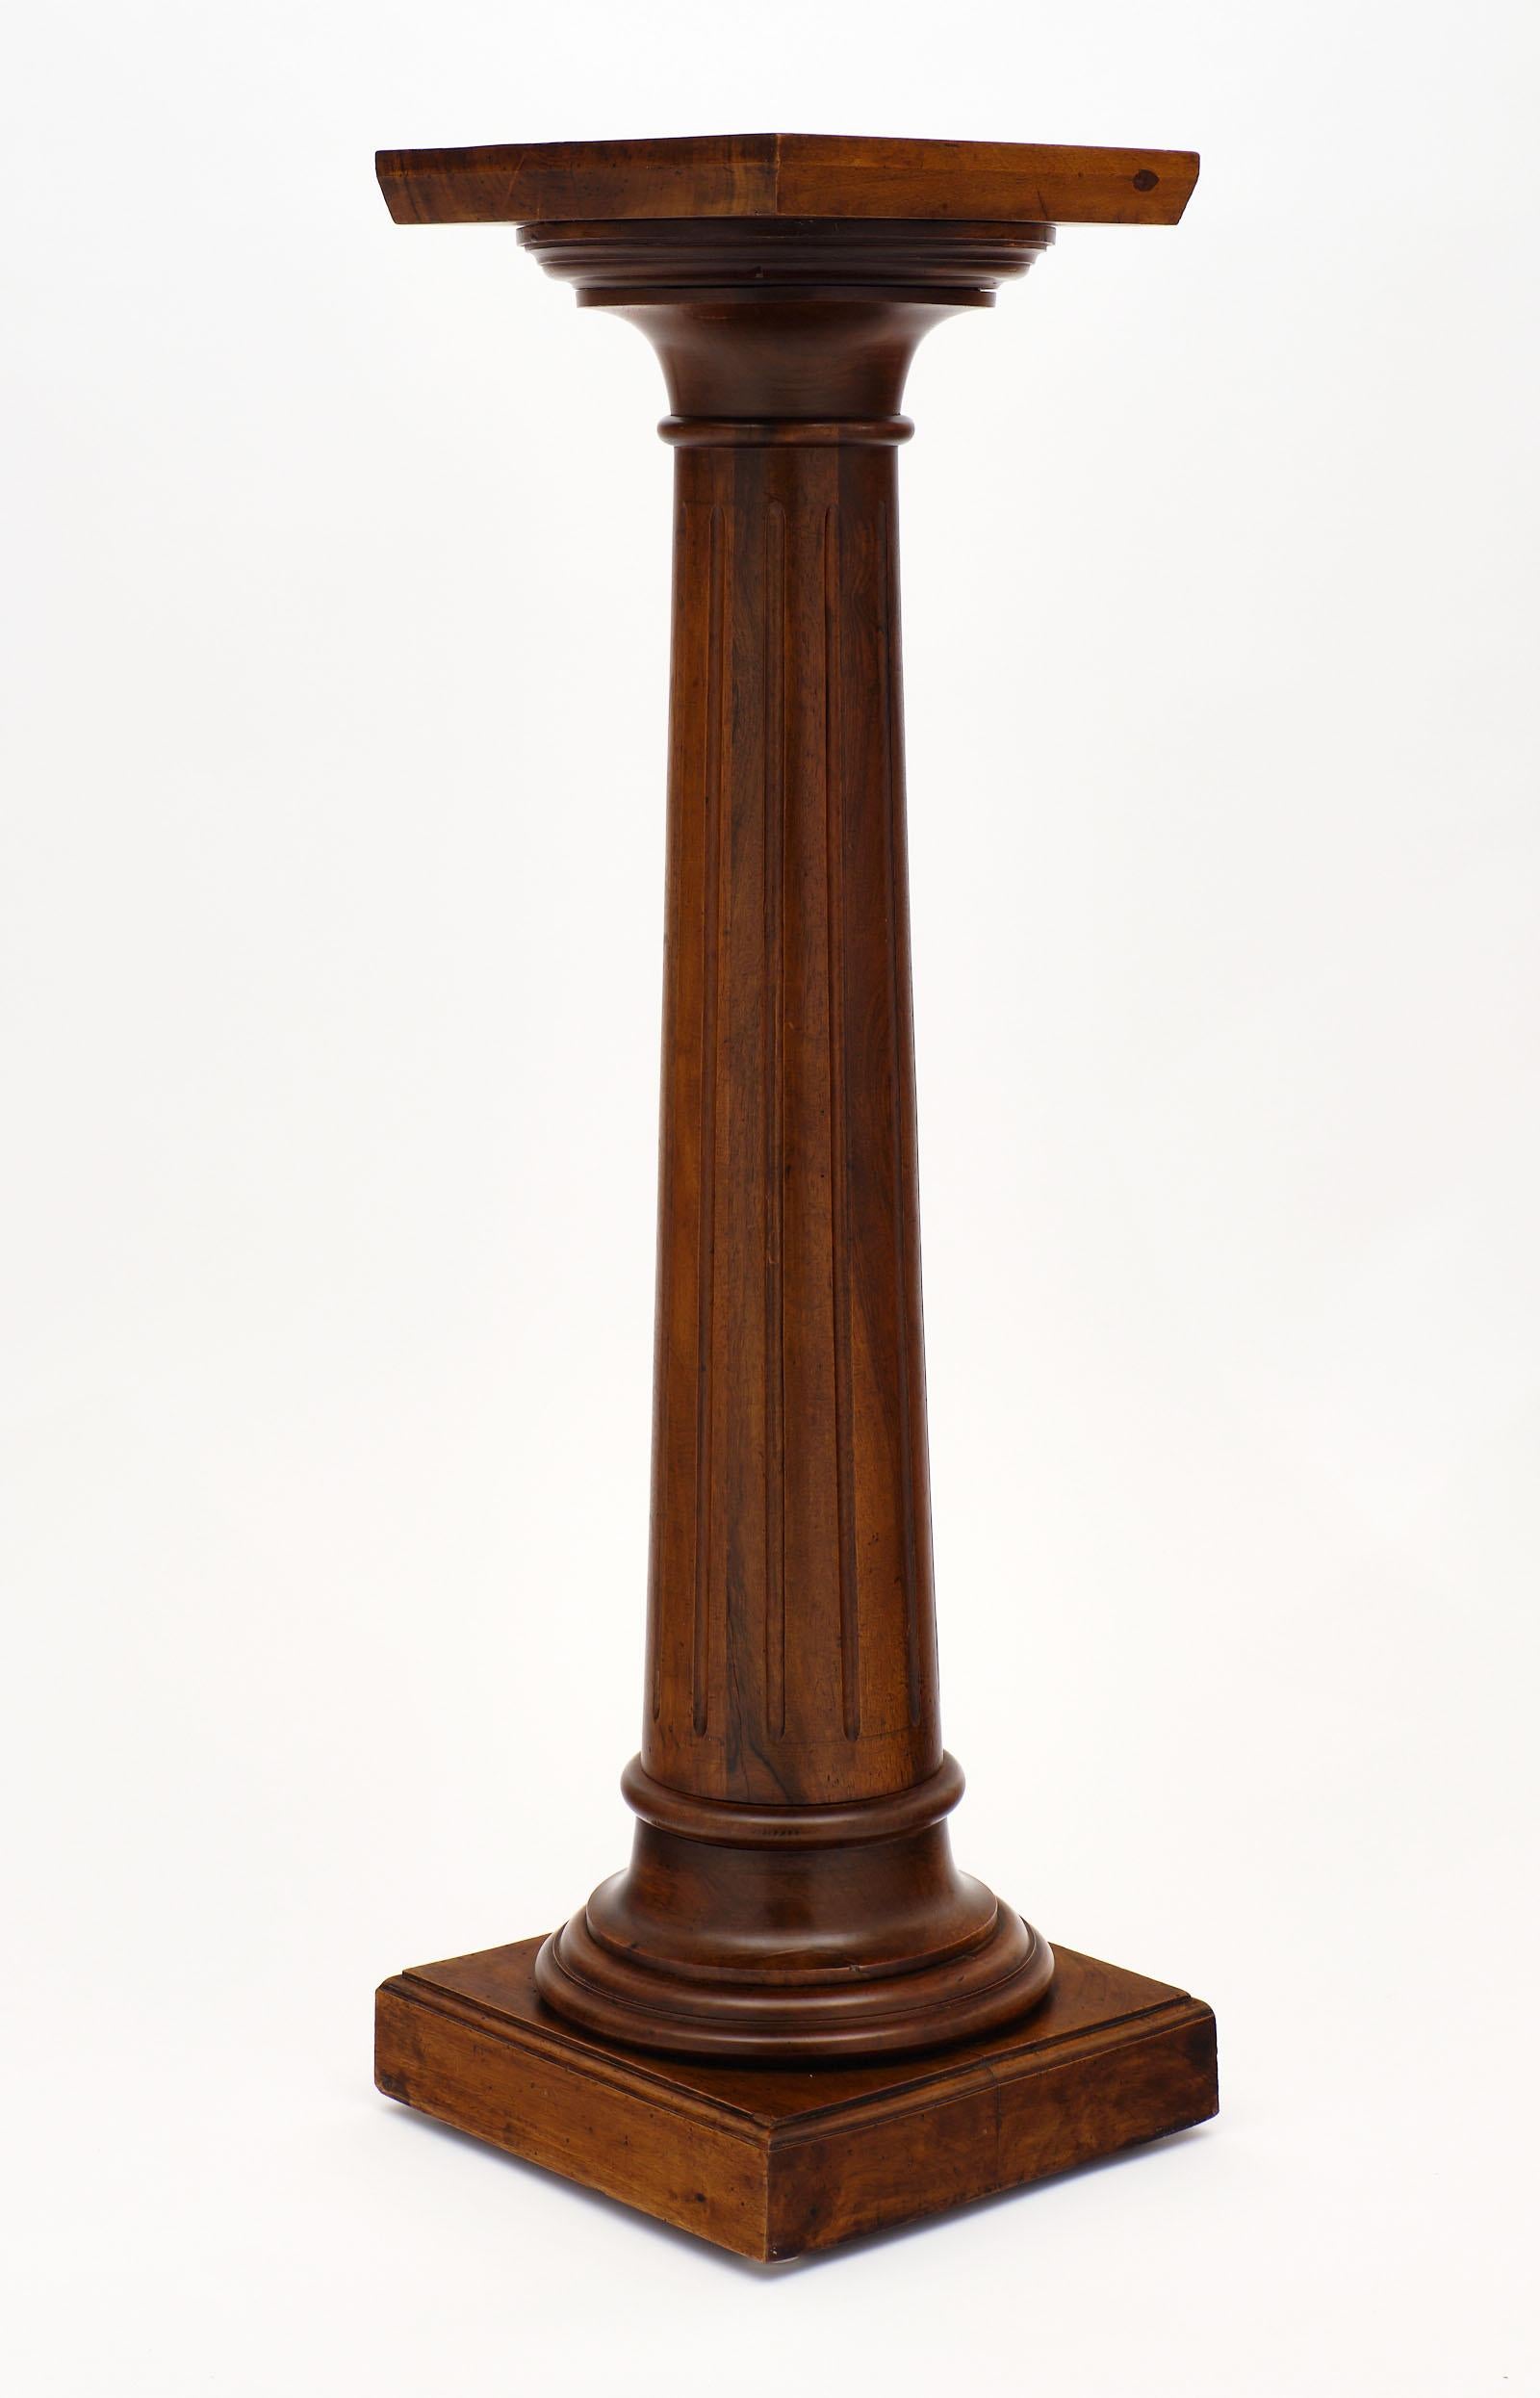 French antique walnut pedestal featuring fluting and a molded base. We love the neoclassic style of this elegant piece!